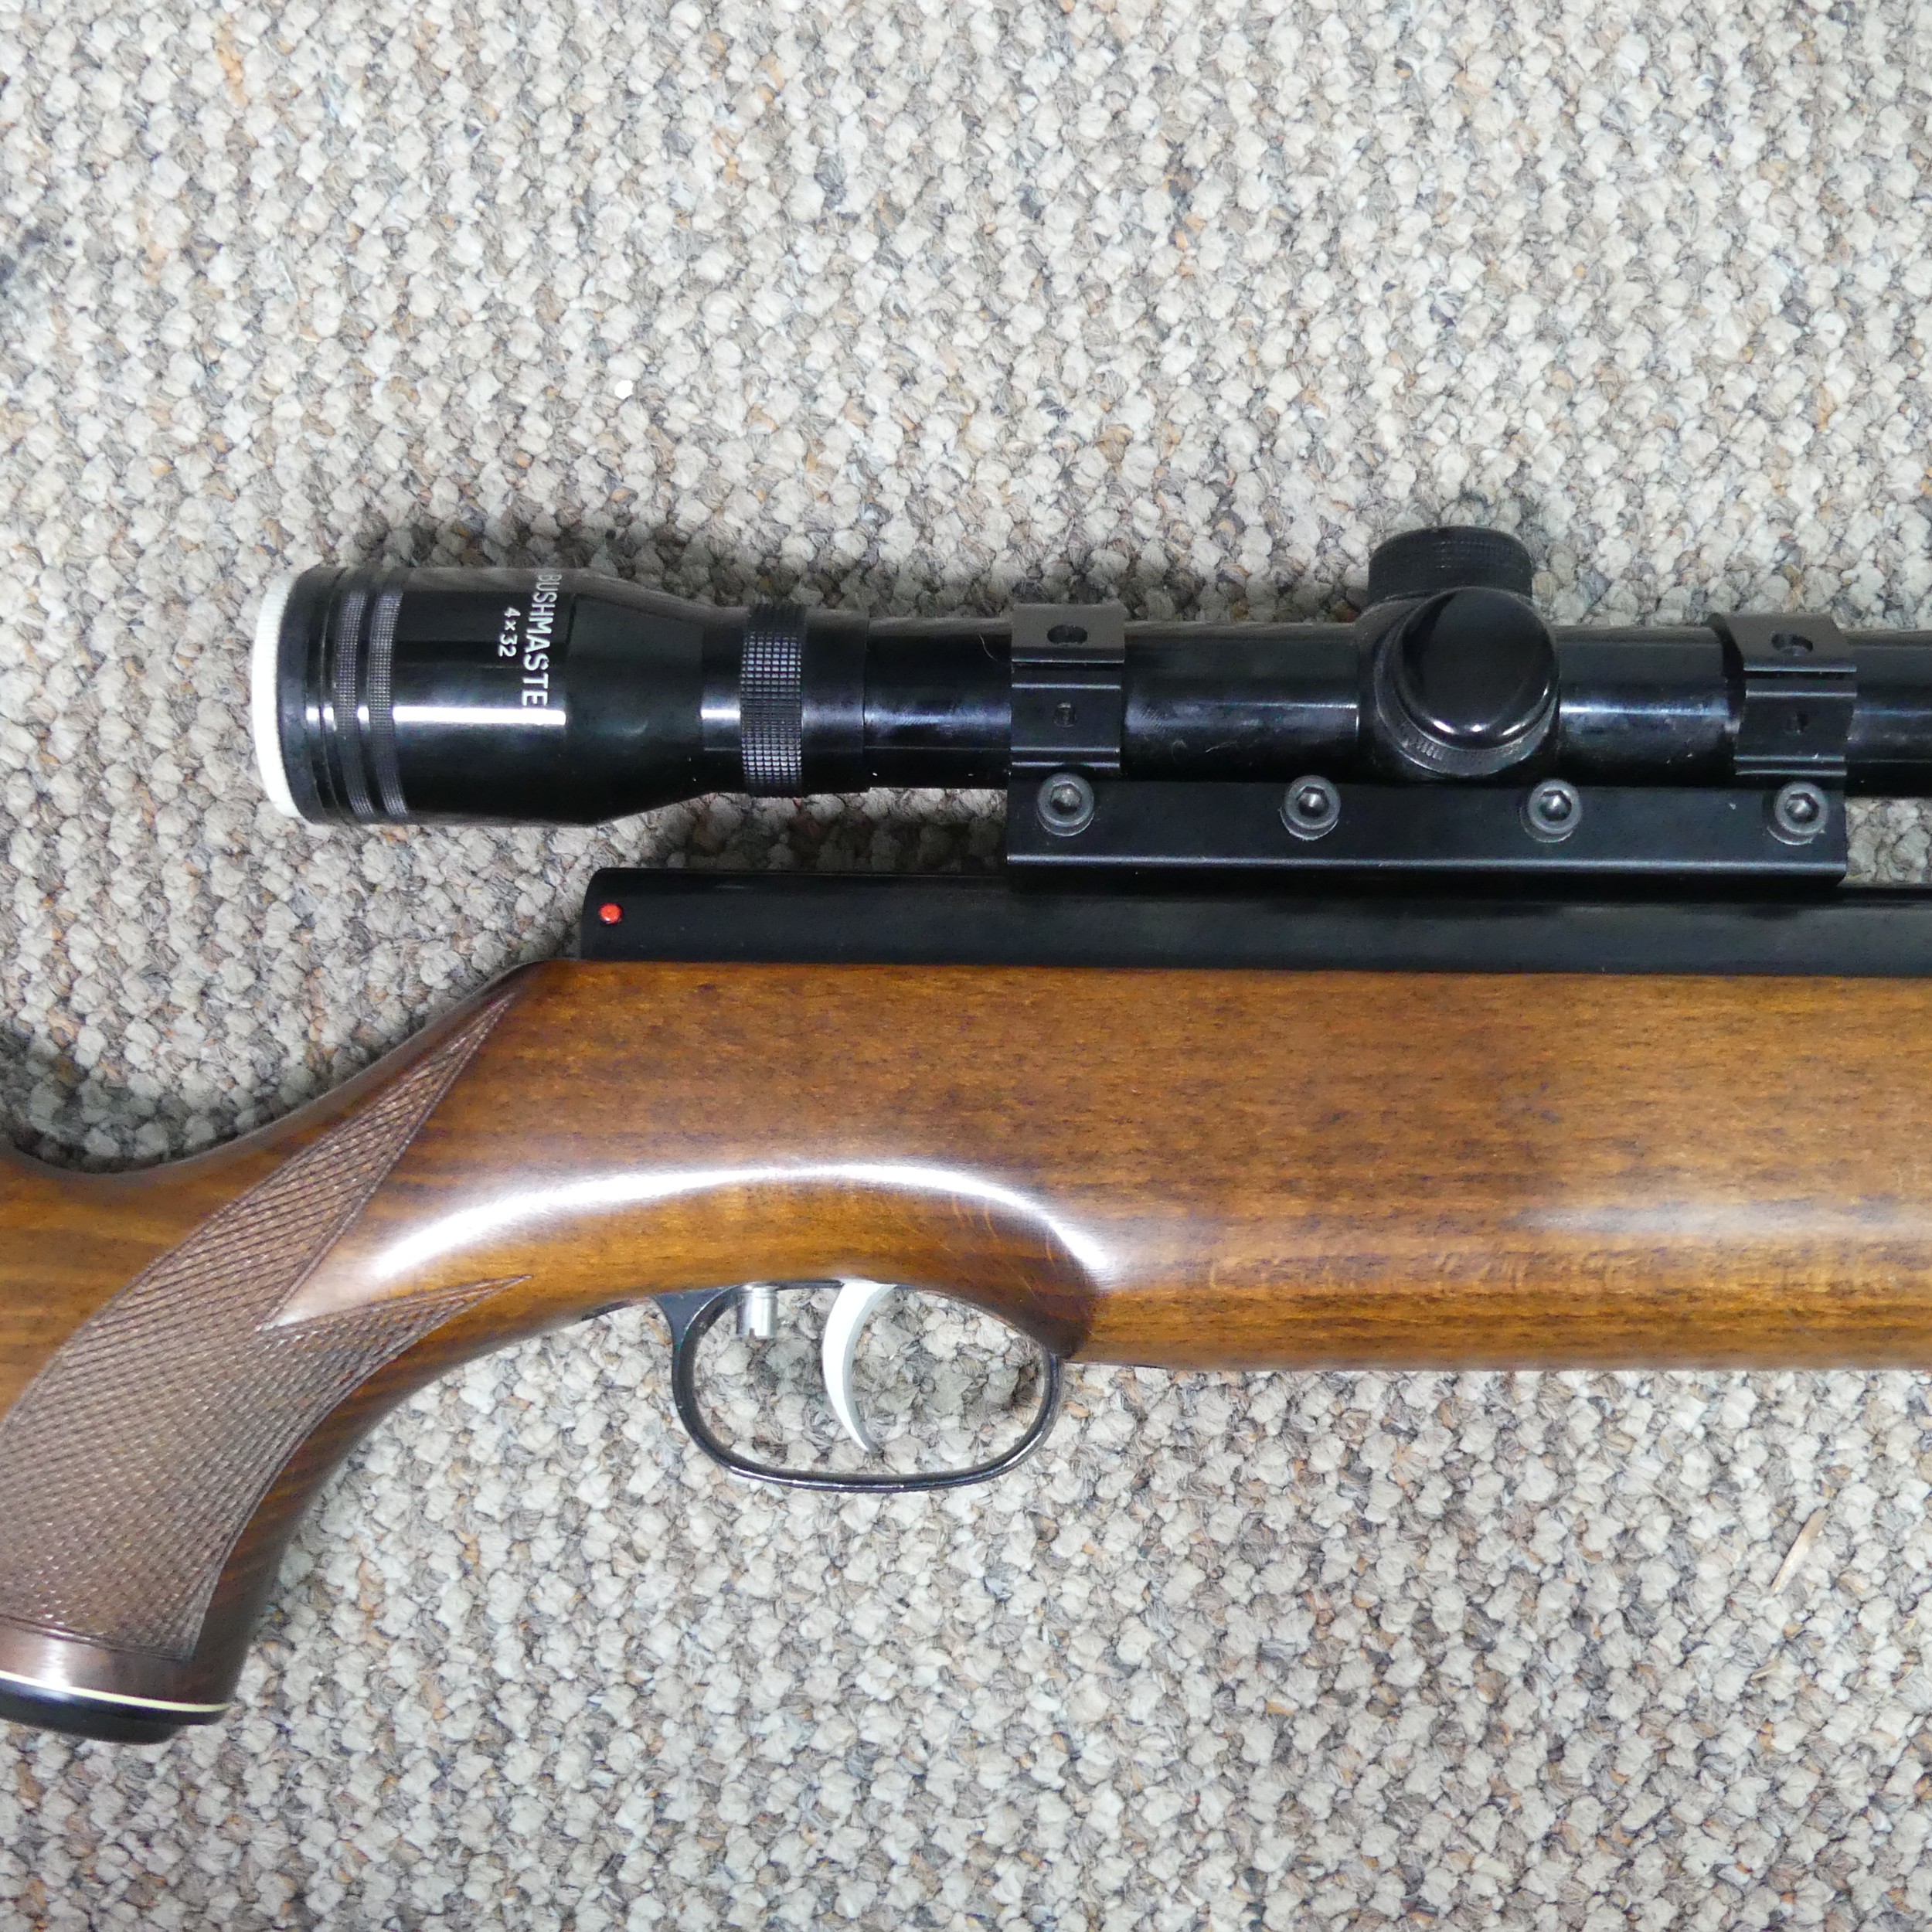 Weihrauch model HW 77 K .22 Air Rifle, with under lever action, beech stock with chequered pistol - Image 5 of 5